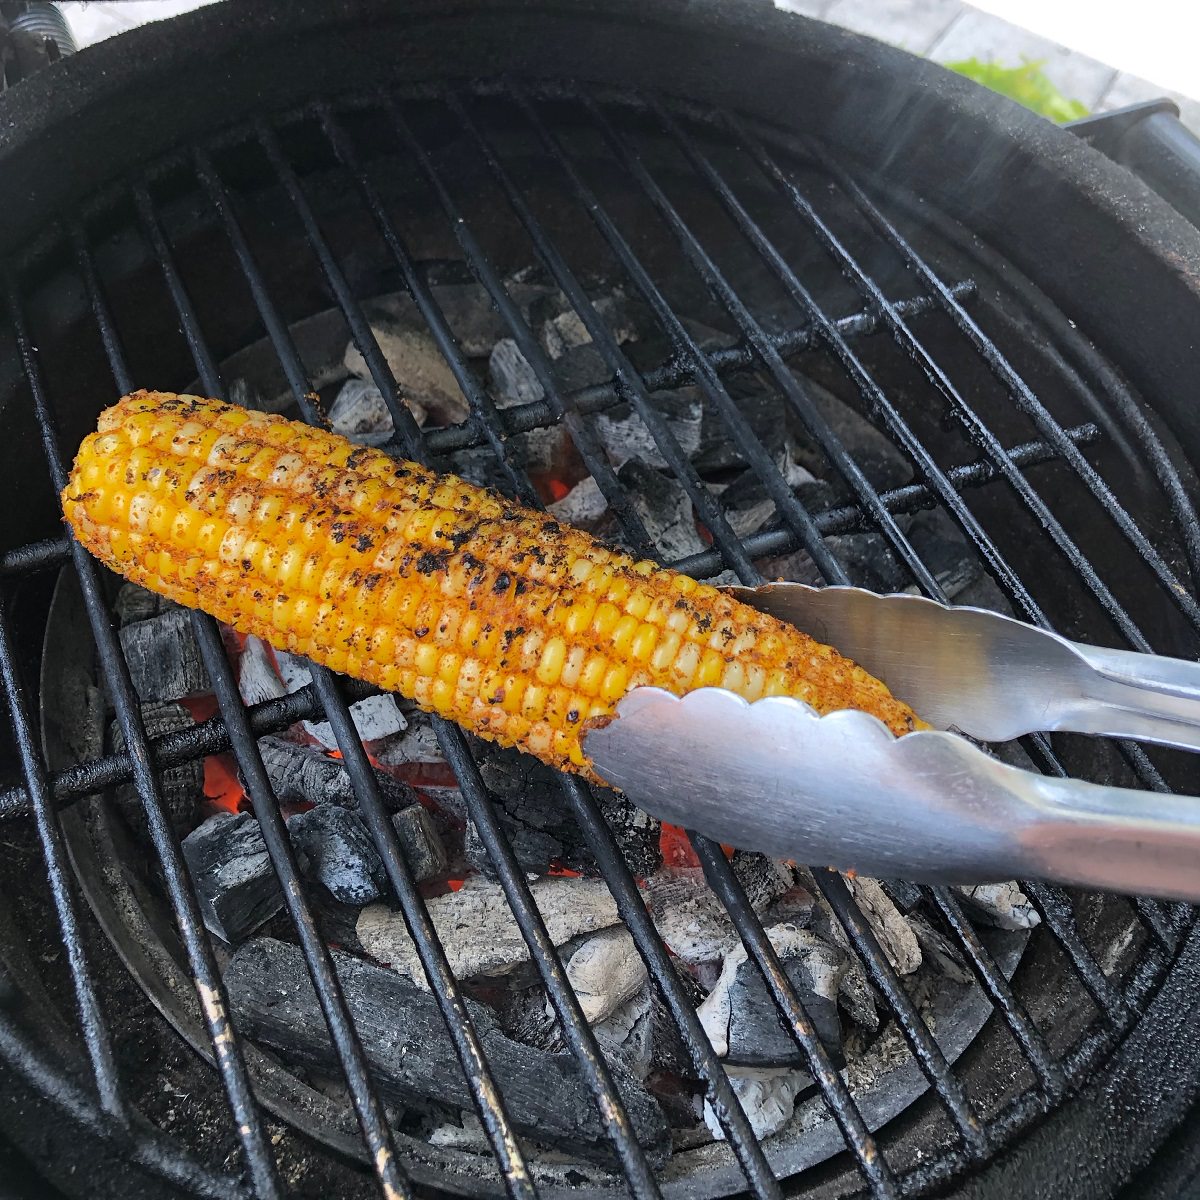 Grill corn directly on grate